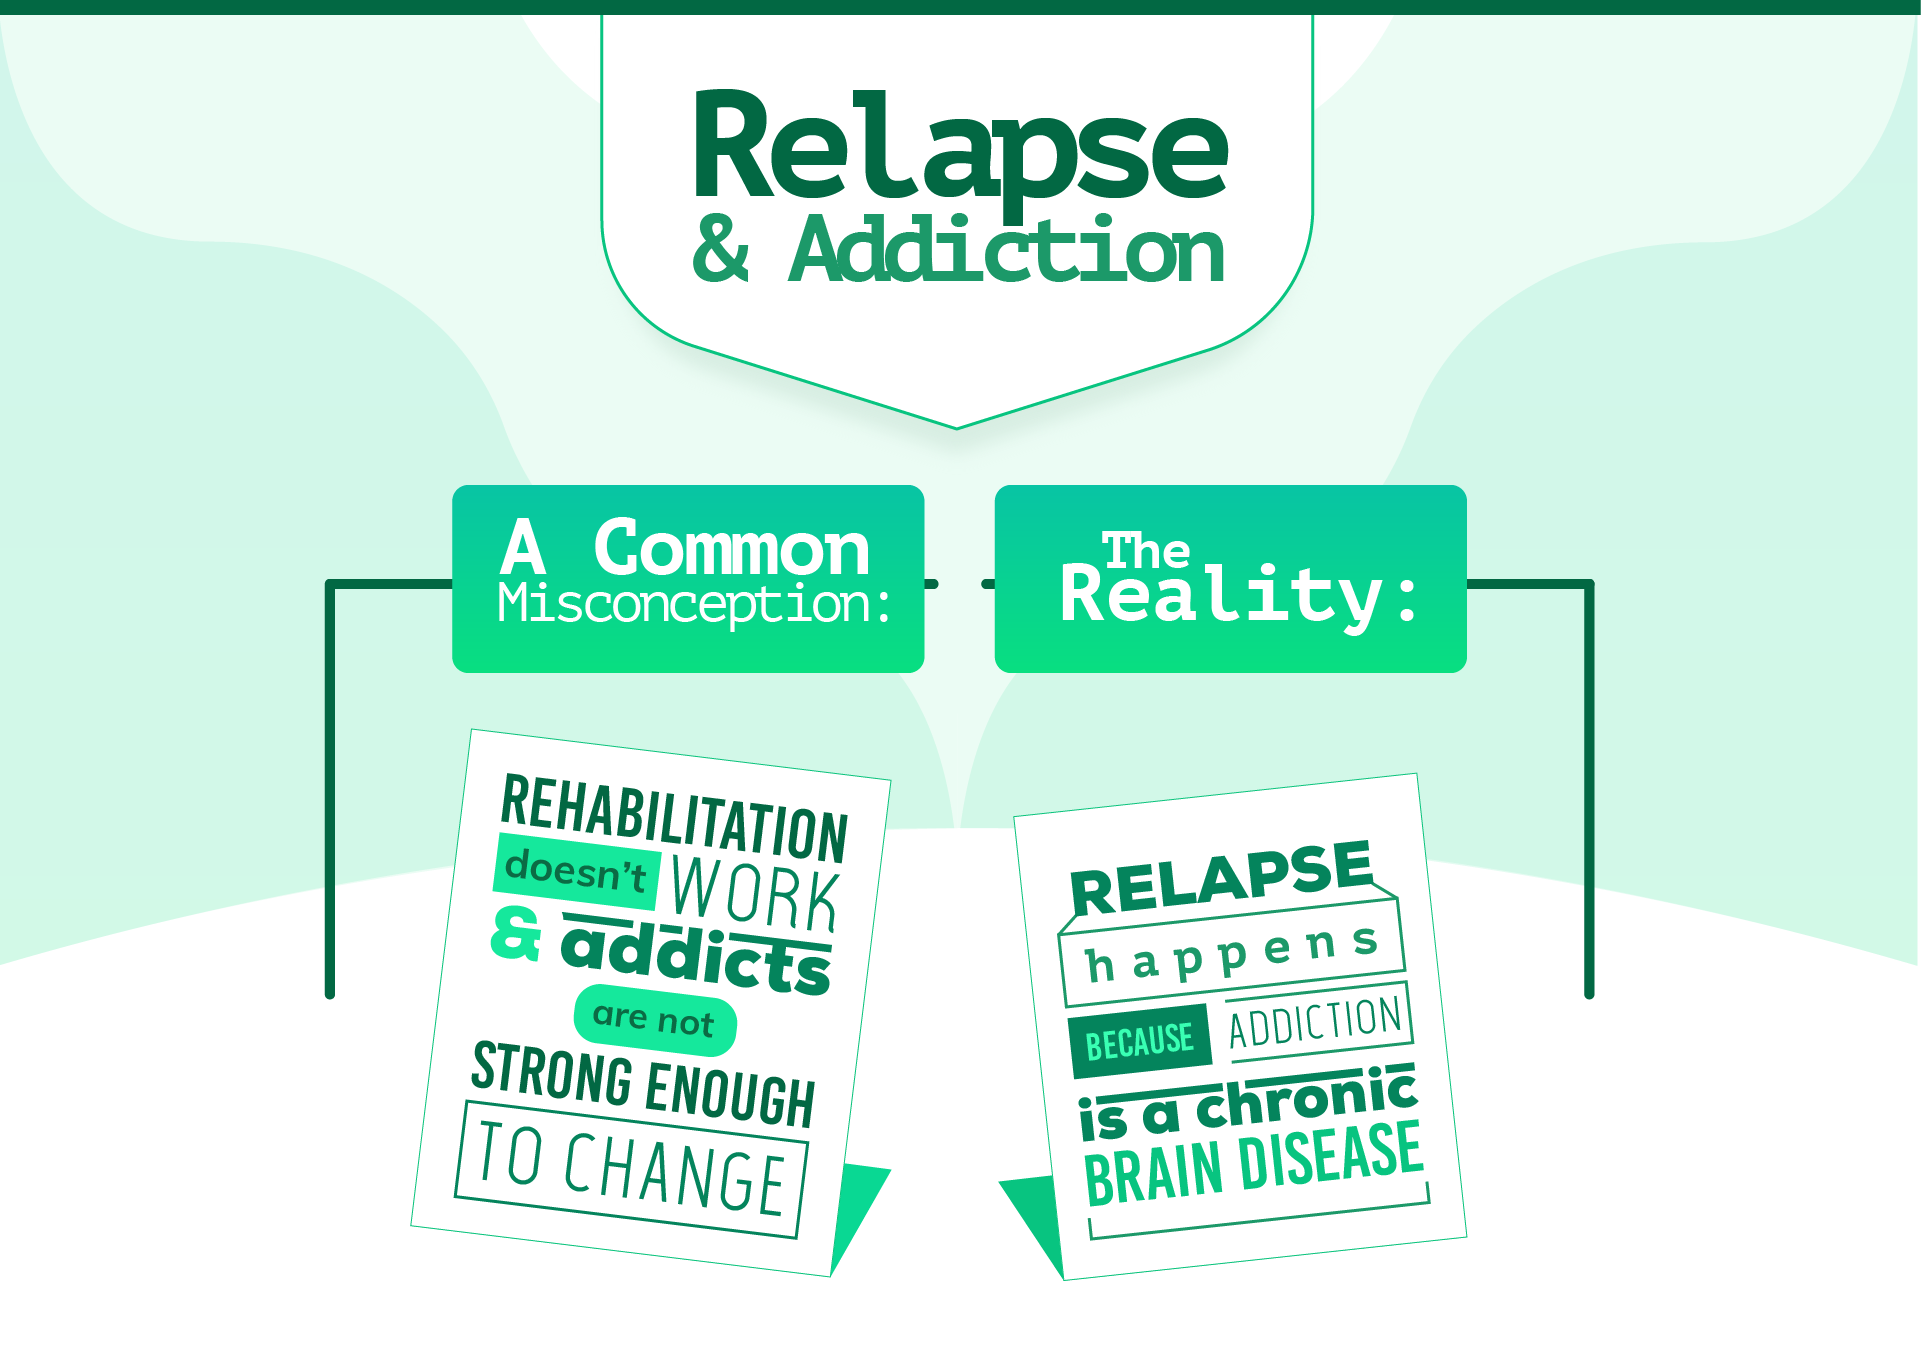 Medical Detox Relapse and Addiction